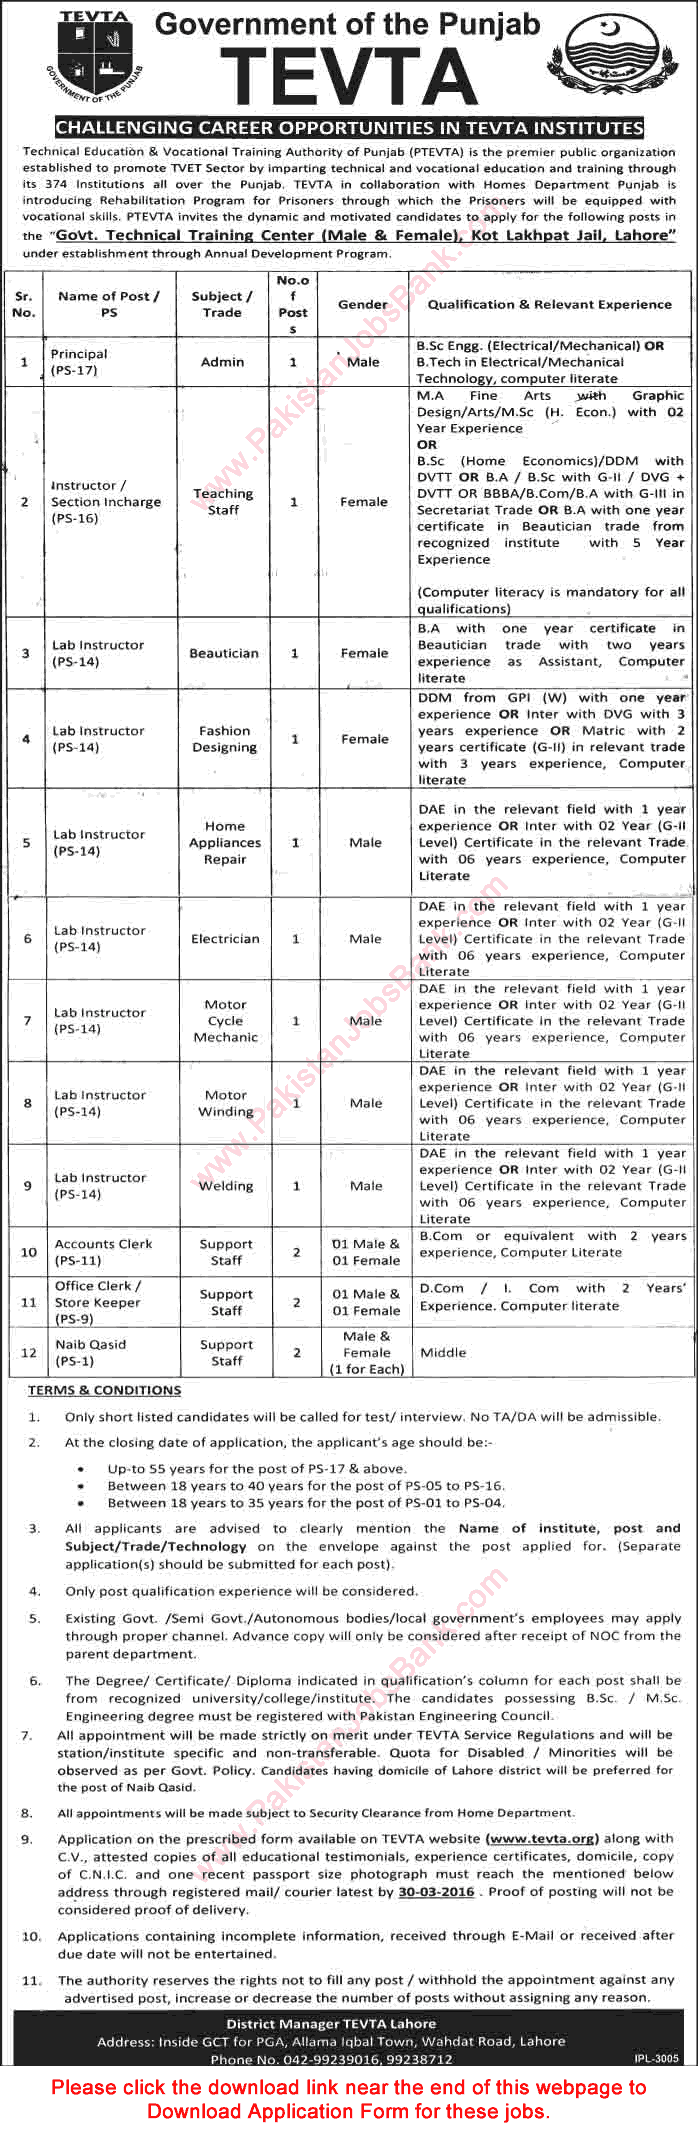 Government Technical Training Center Lahore Jobs 2016 March TEVTA Punjab Application Form Download Latest